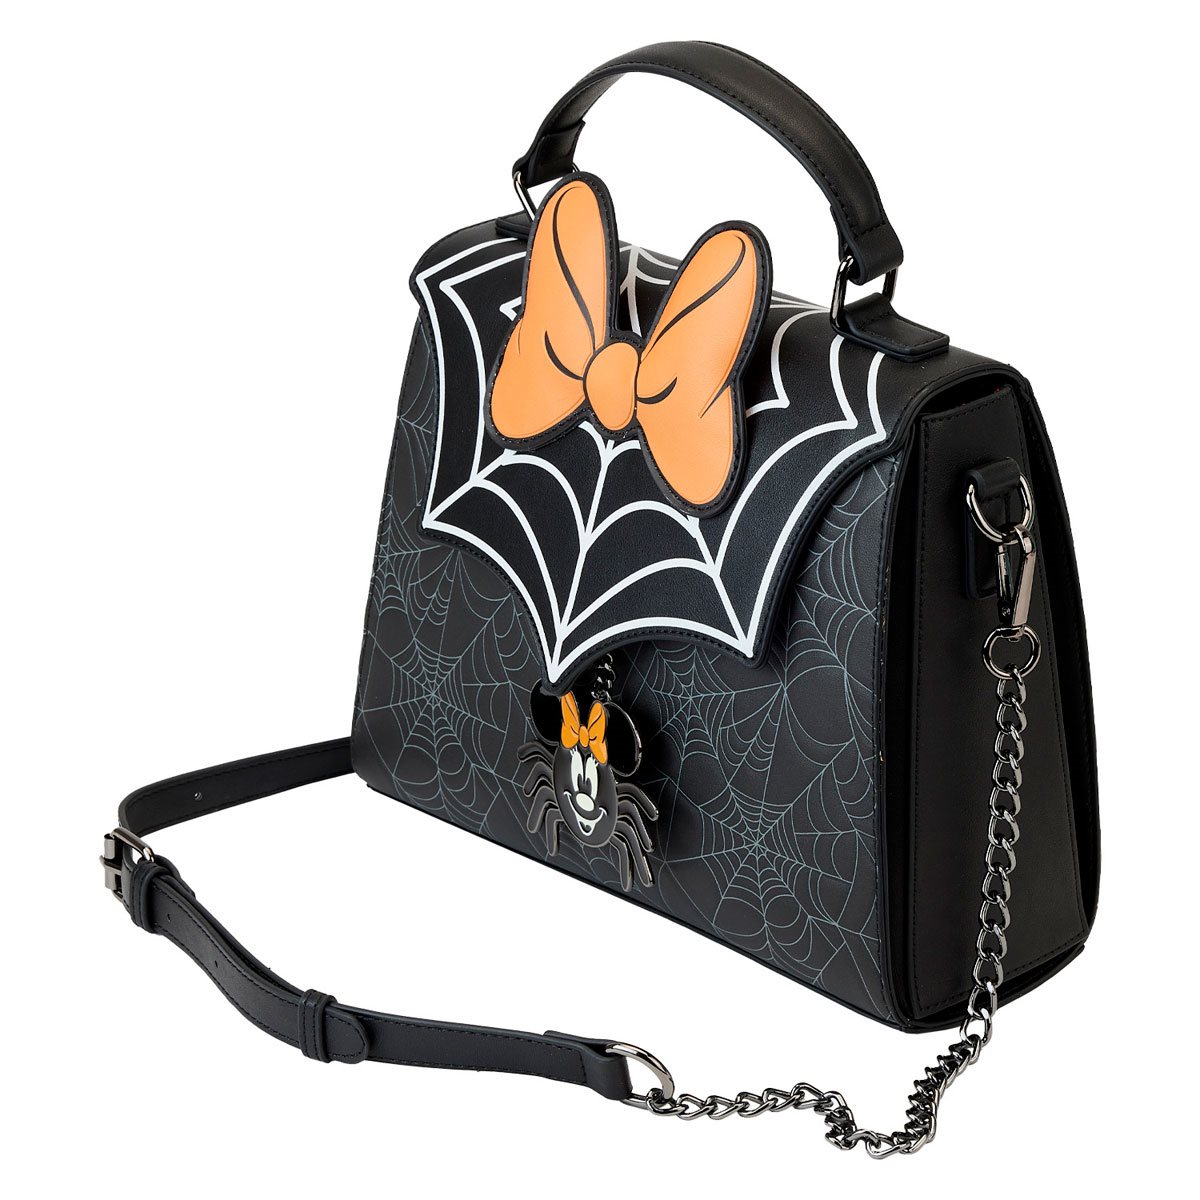 Disney Halloween Mickey and Minnie Mouse Spider Glow-in-the-Dark